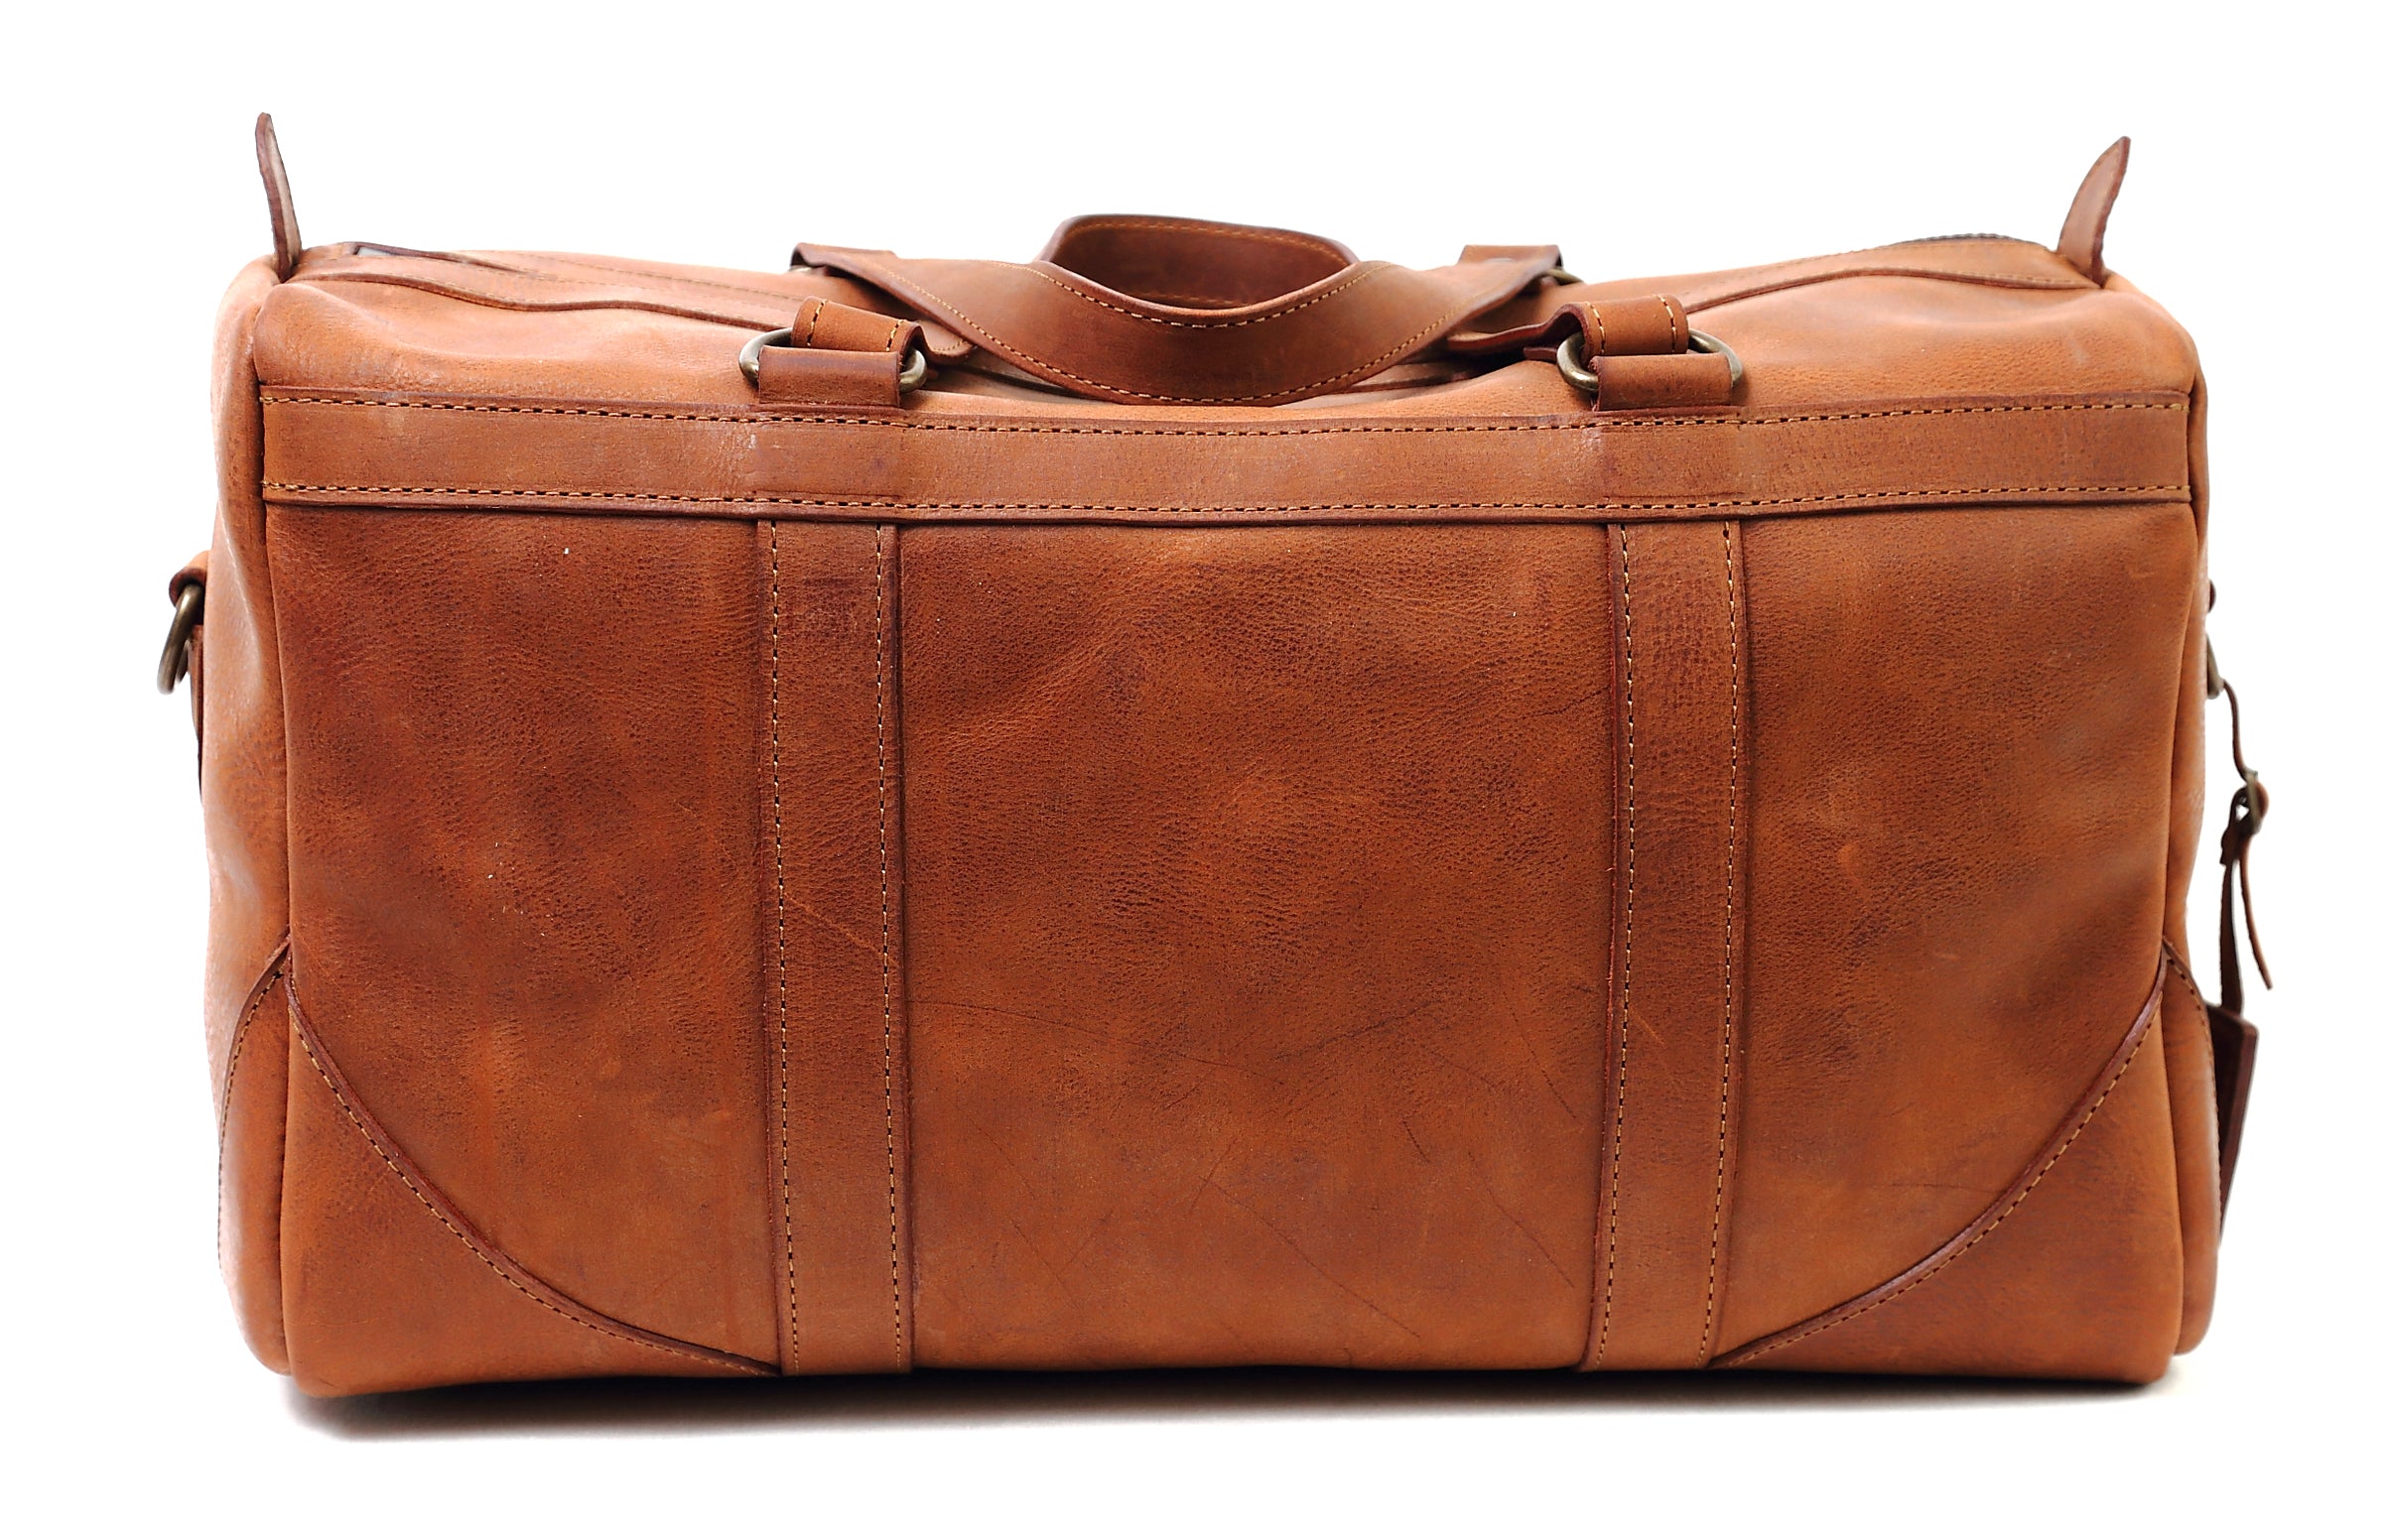 Journey Duffel Bag Heritage Brown The Dust Company su Artisia Store